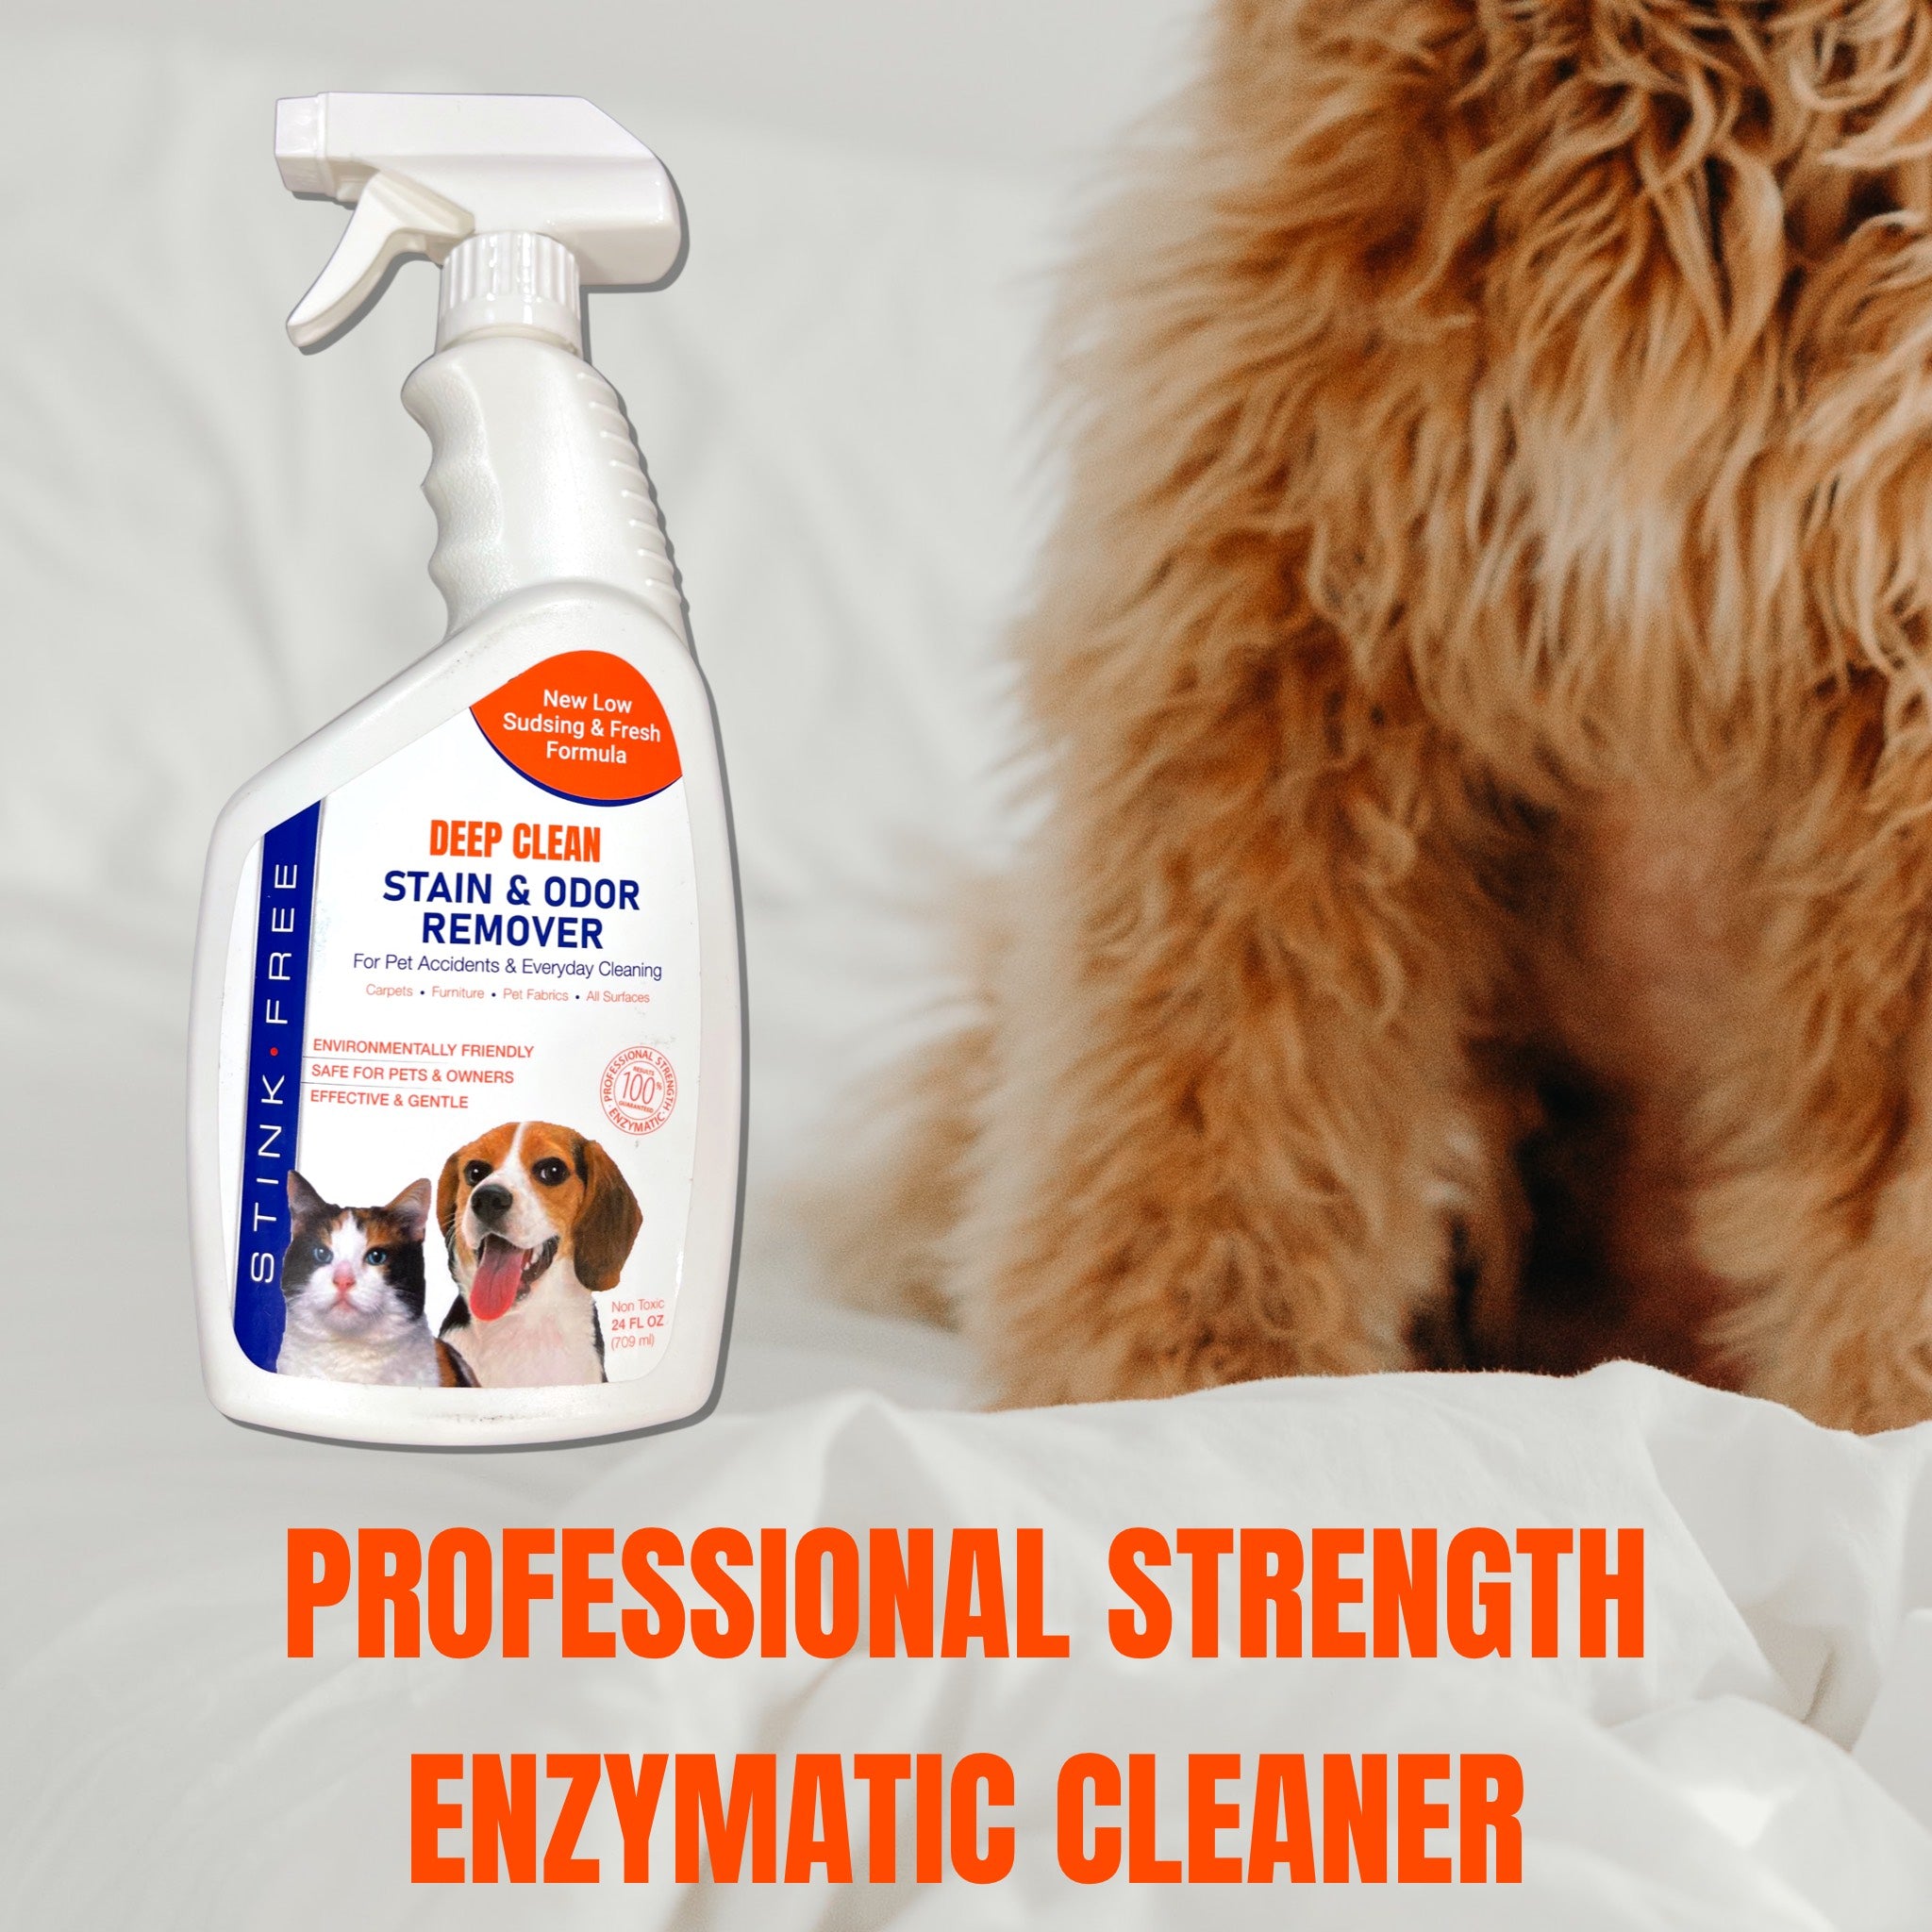 Deep Clean Carpet Stain & Odor Remover For Pets - 24 oz Spray